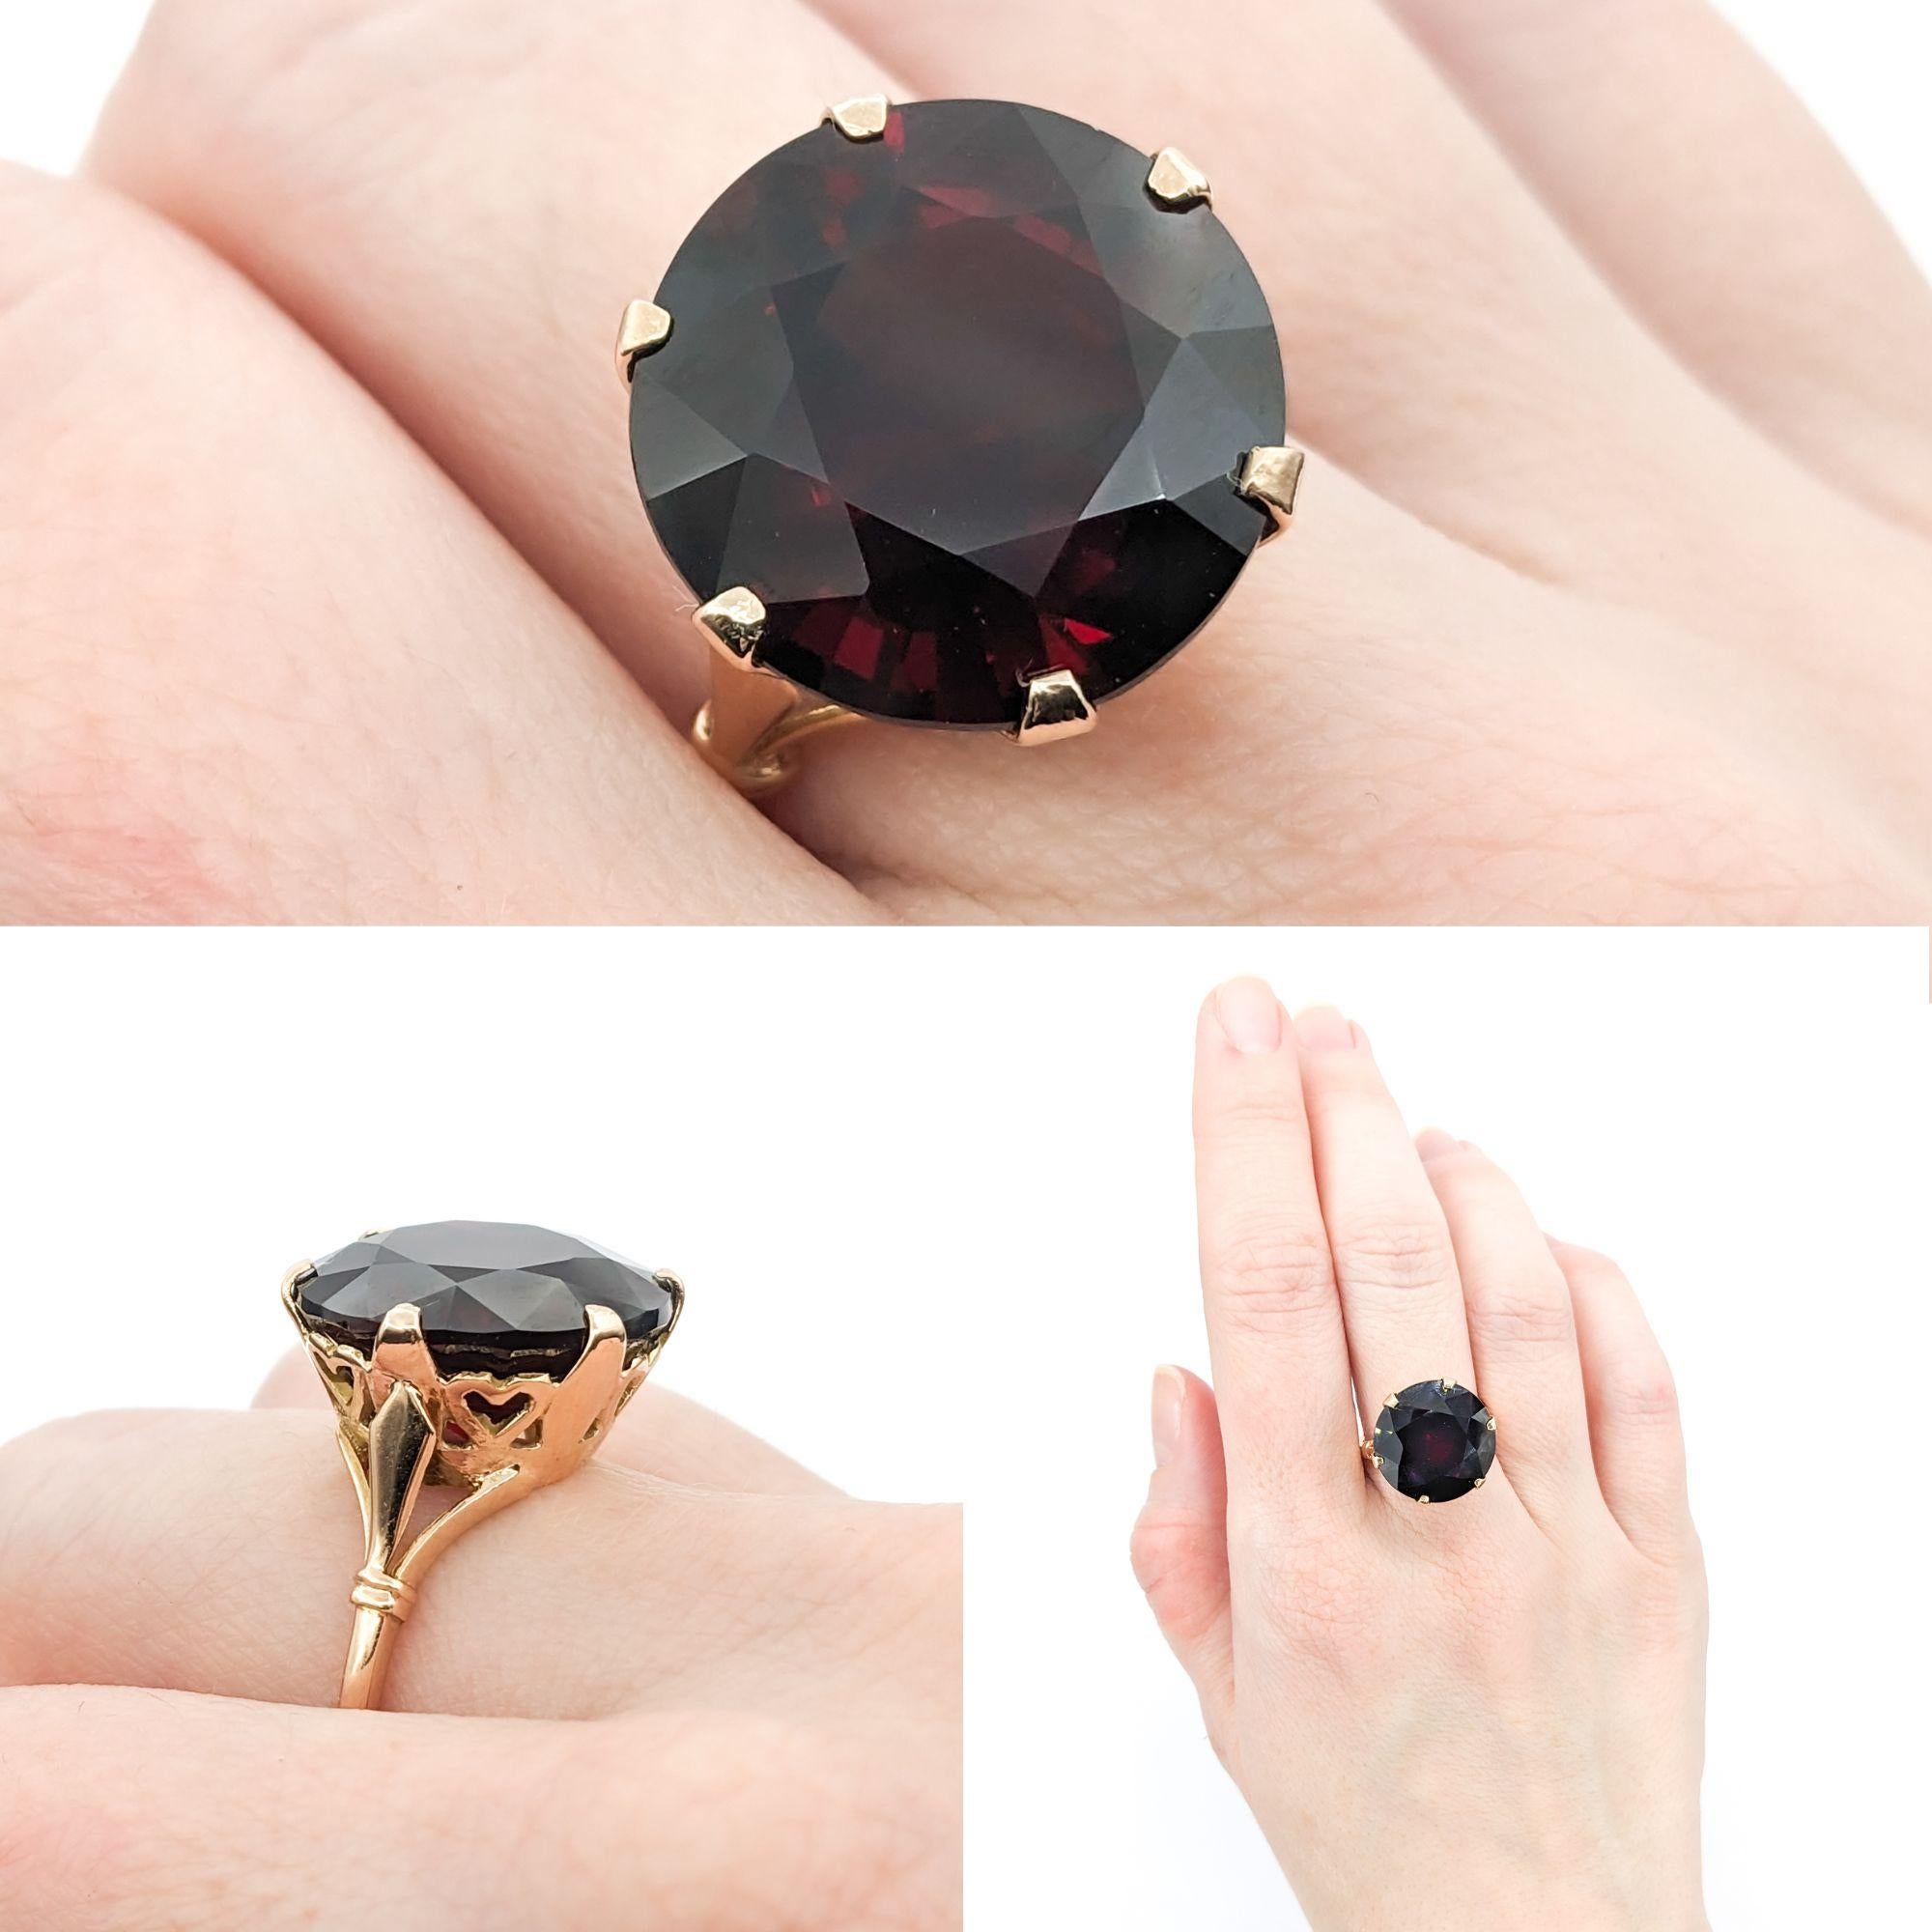 16.42ct Natural Pyrope Garnet Ring In Yellow Gold

Introducing this exquisite natural Garnet Statement Ring, masterfully crafted in 14k Yellow Gold. At its heart lies a magnificent 16.42ct natural round Pyrope Garnet with a captivating wine red